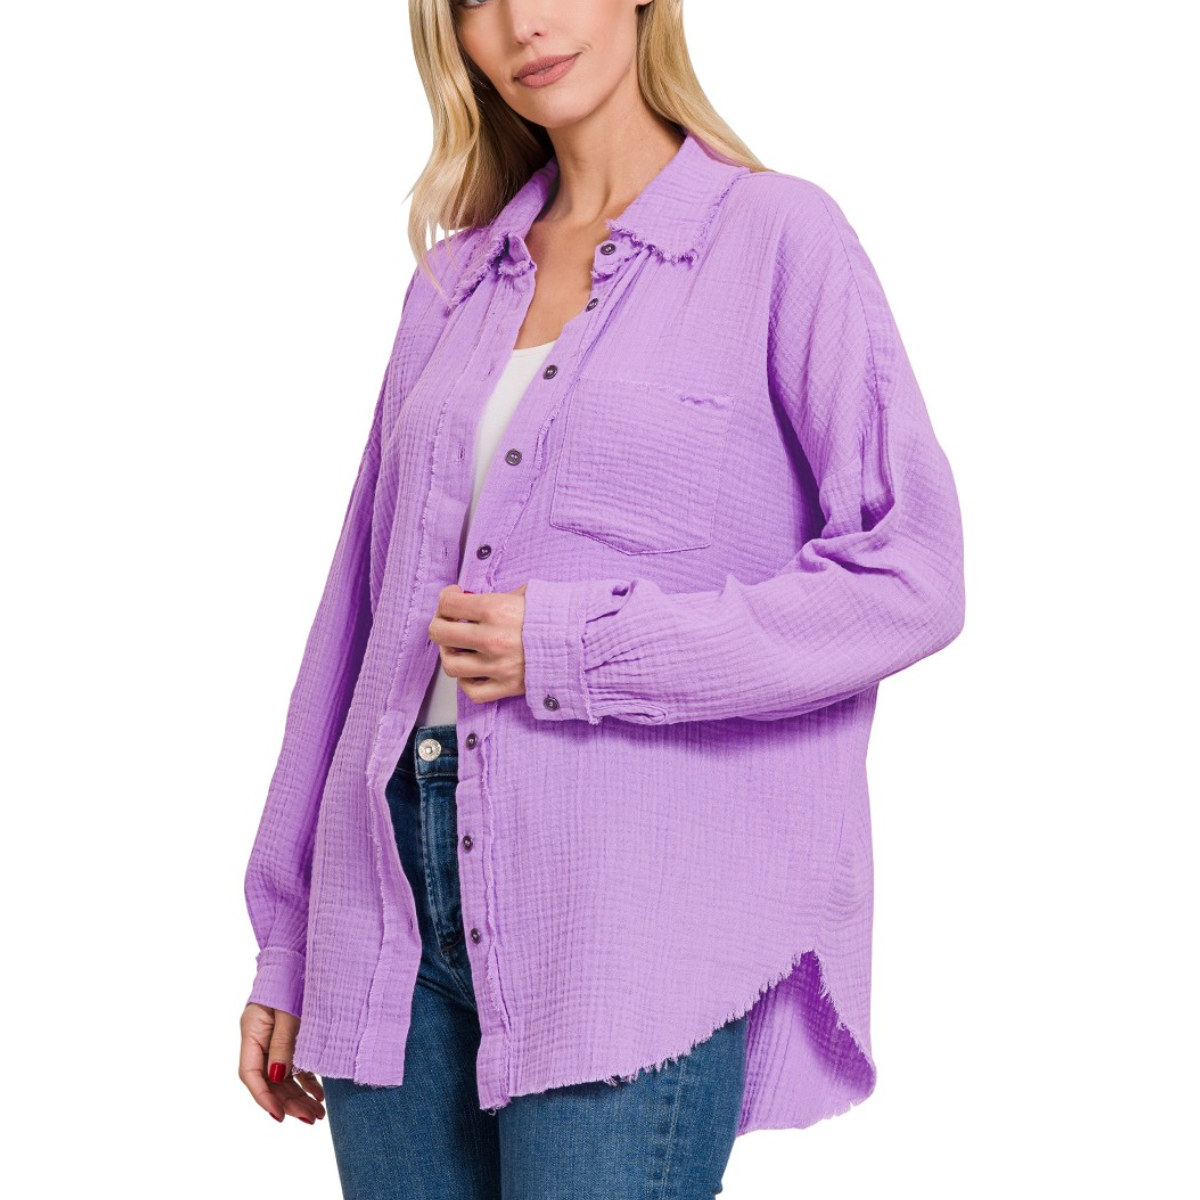 A woman wearing a FASHION GO Gauze Oversized Raw Edge Button Up Shirt and jeans.